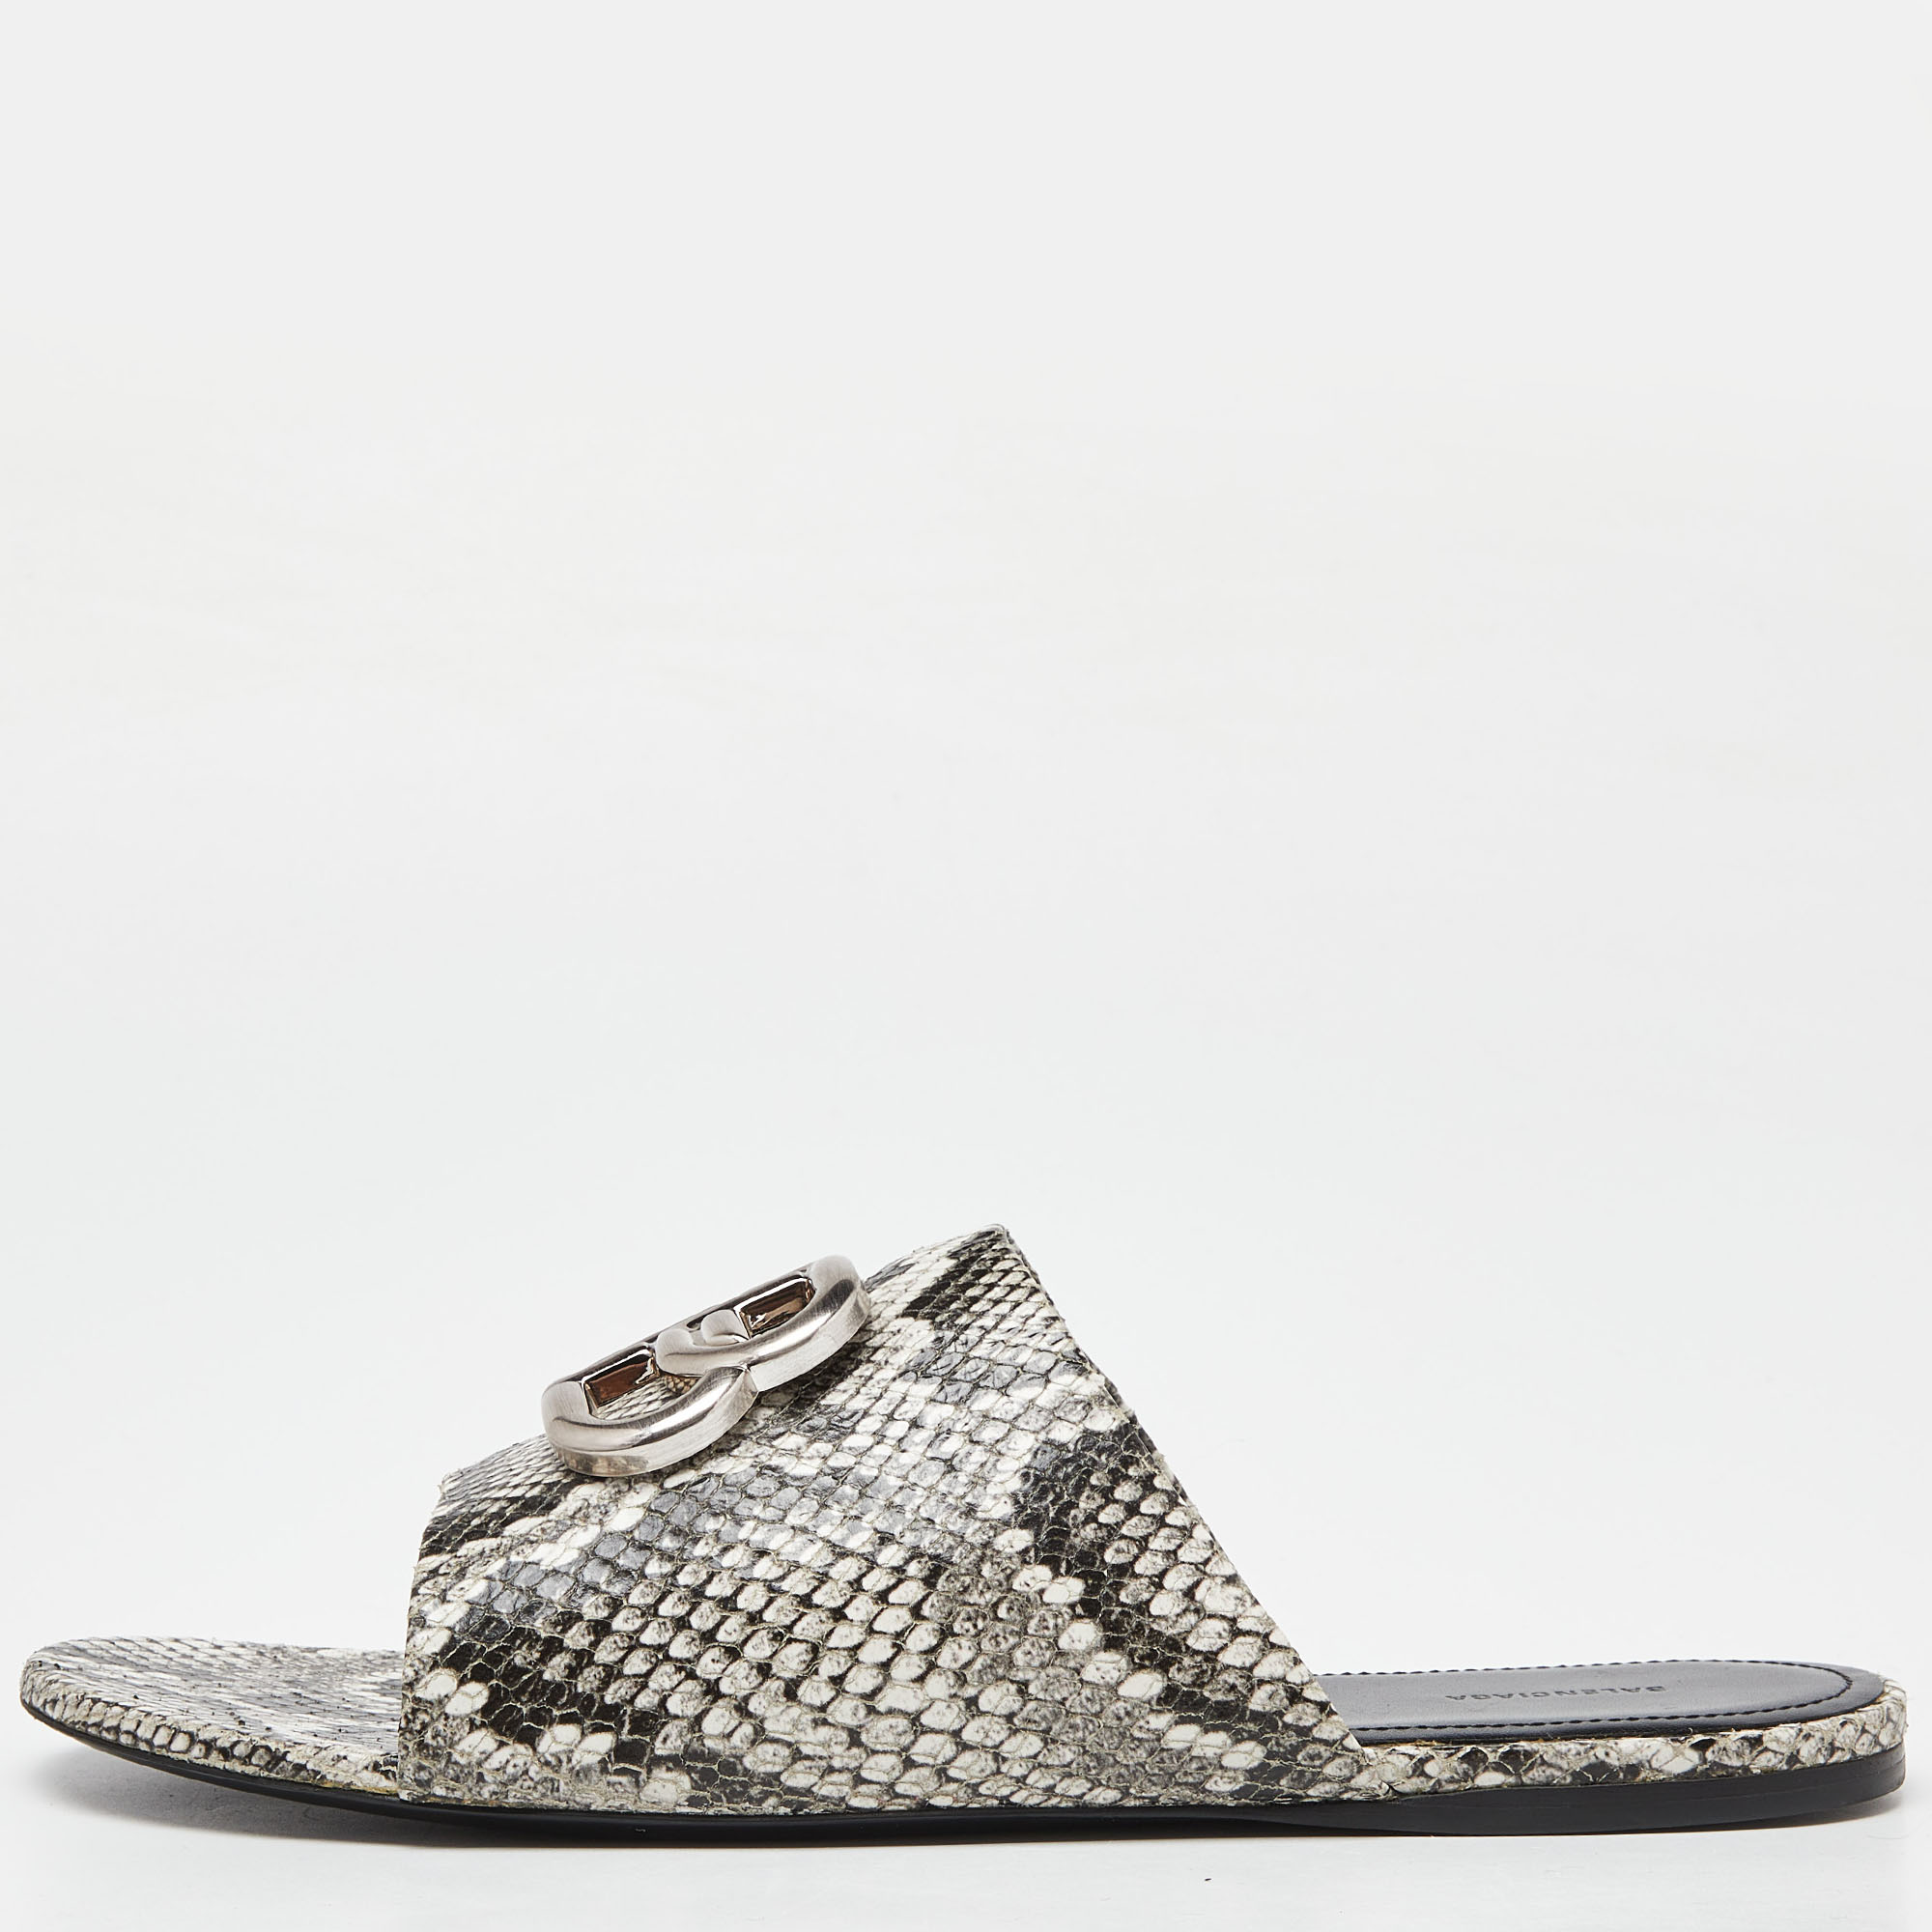 Pre-owned Balenciaga Grey/white Python Embossed Leather Bb Flat Slides Size 7